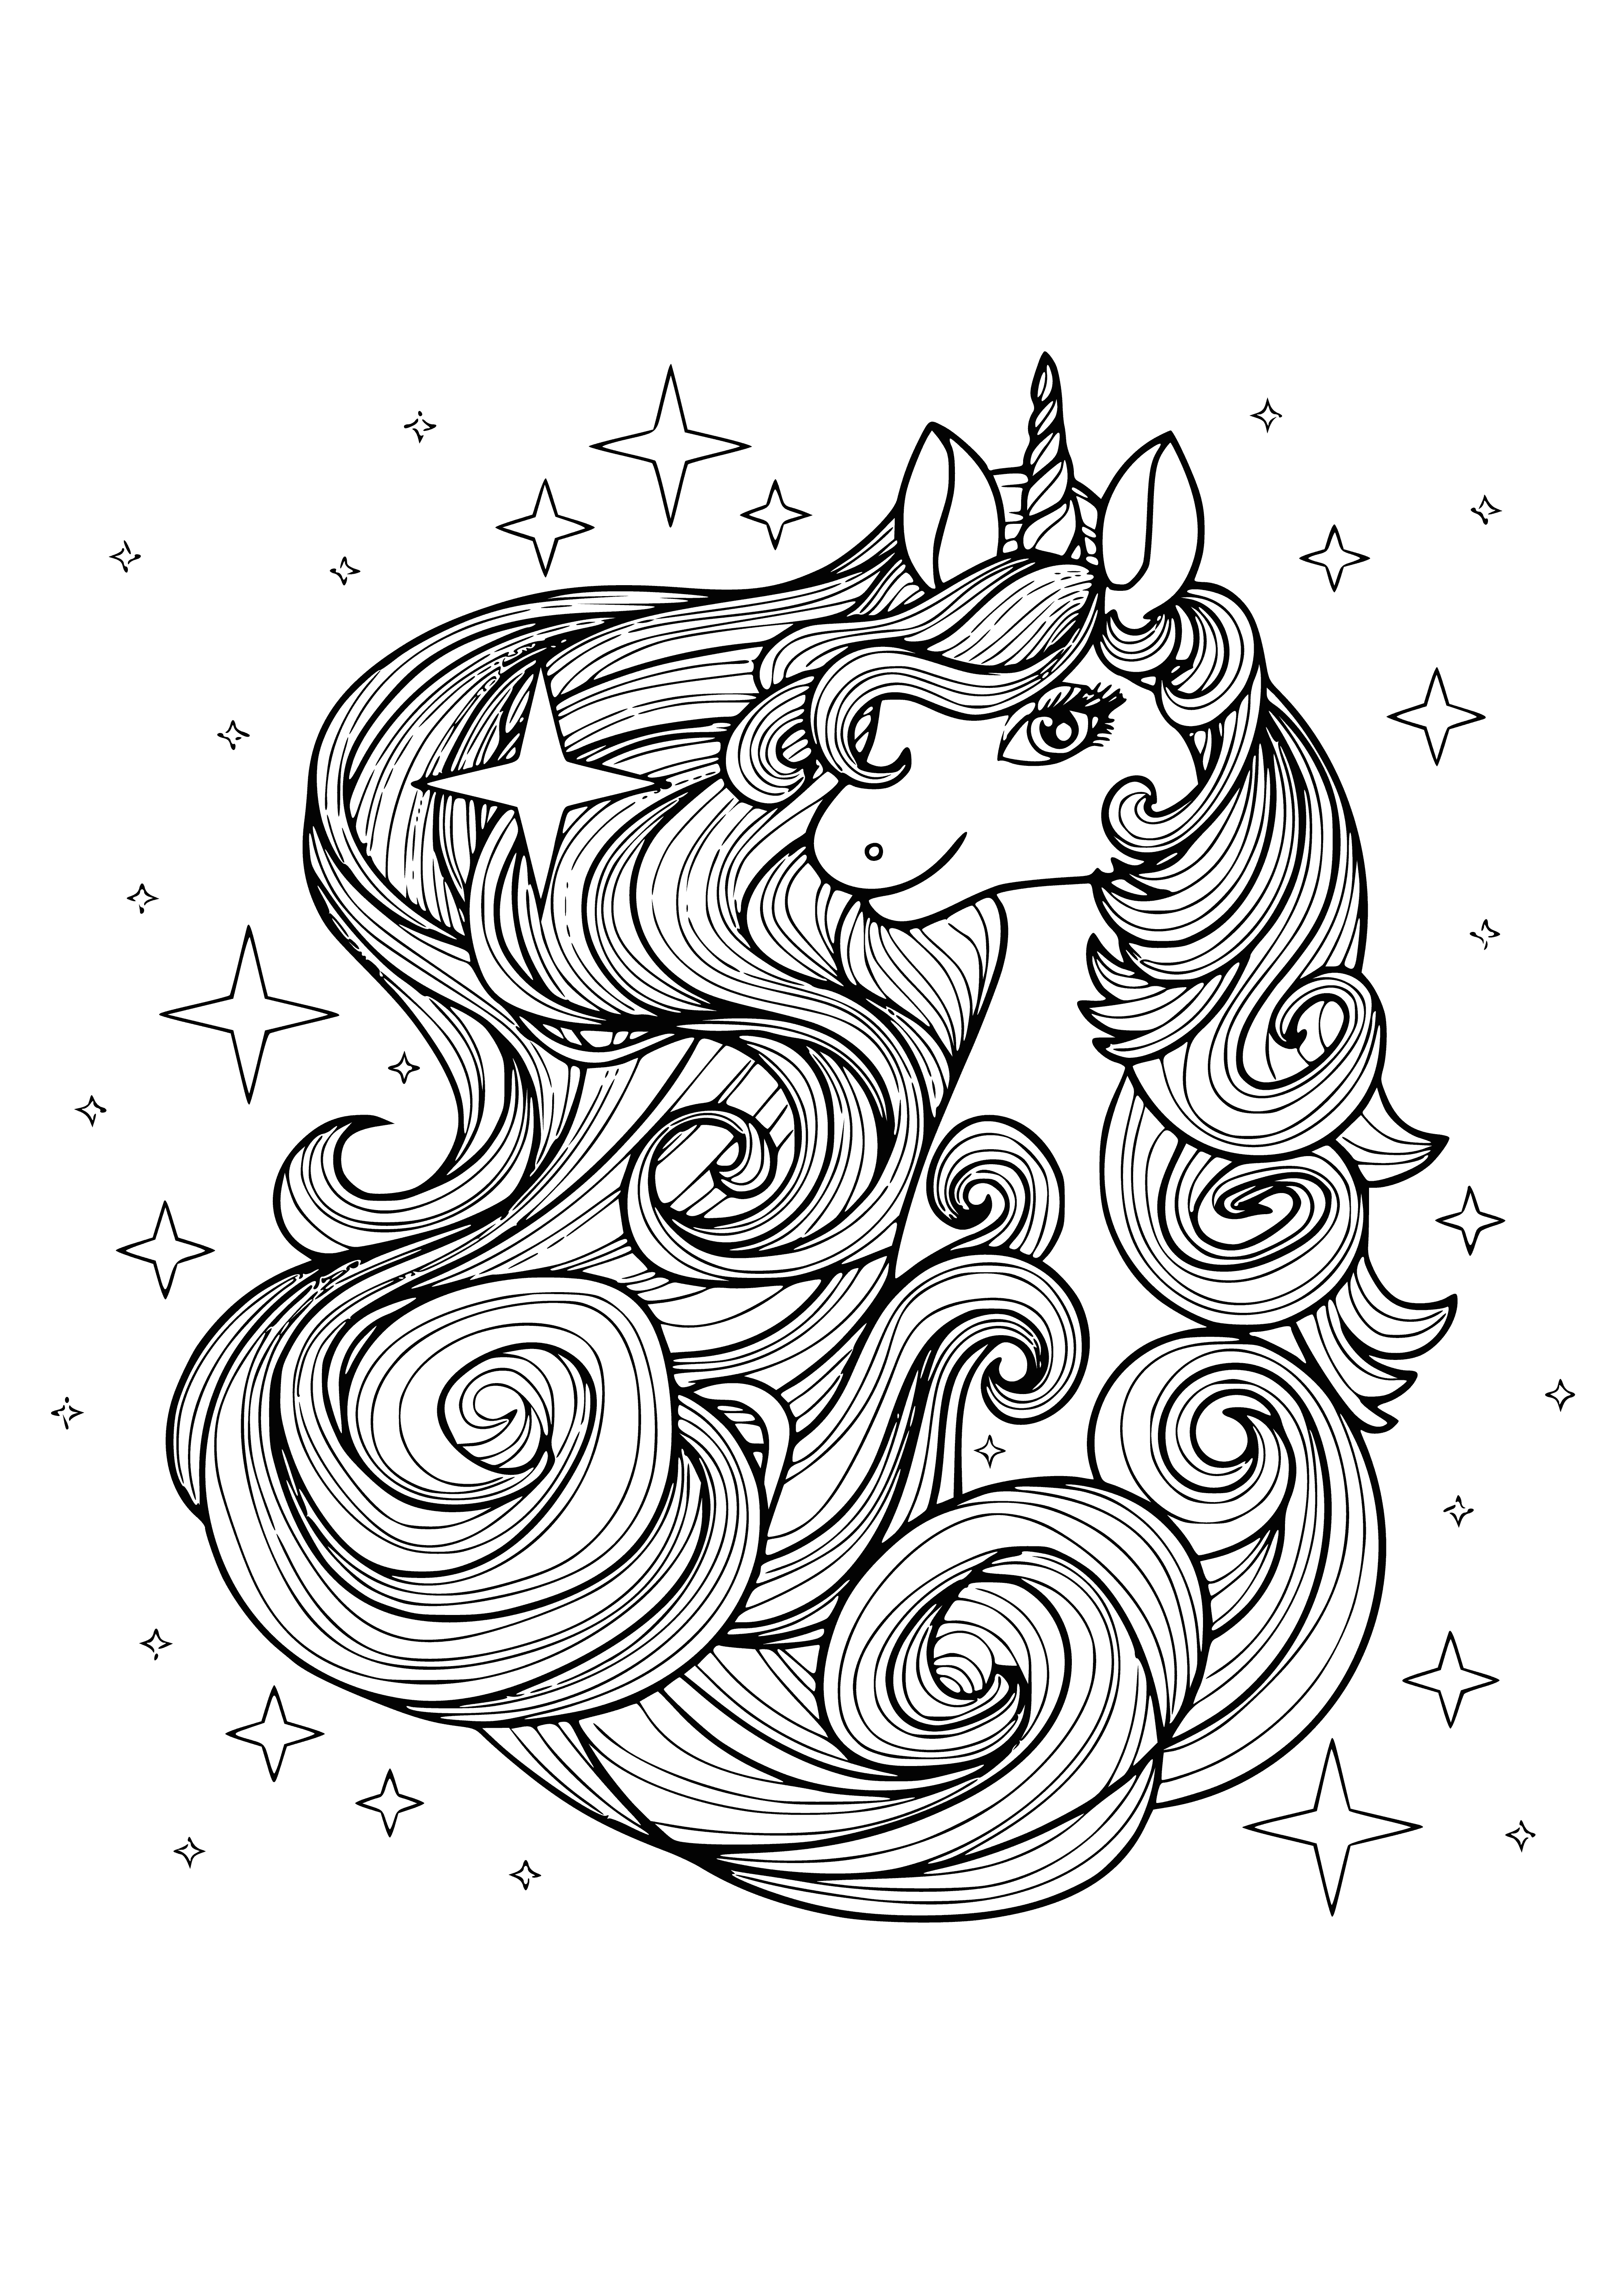 coloring page: Relax with a beautiful, stress-reducing unicorn coloring page filled with flowers and stars. Perfect after a long day!